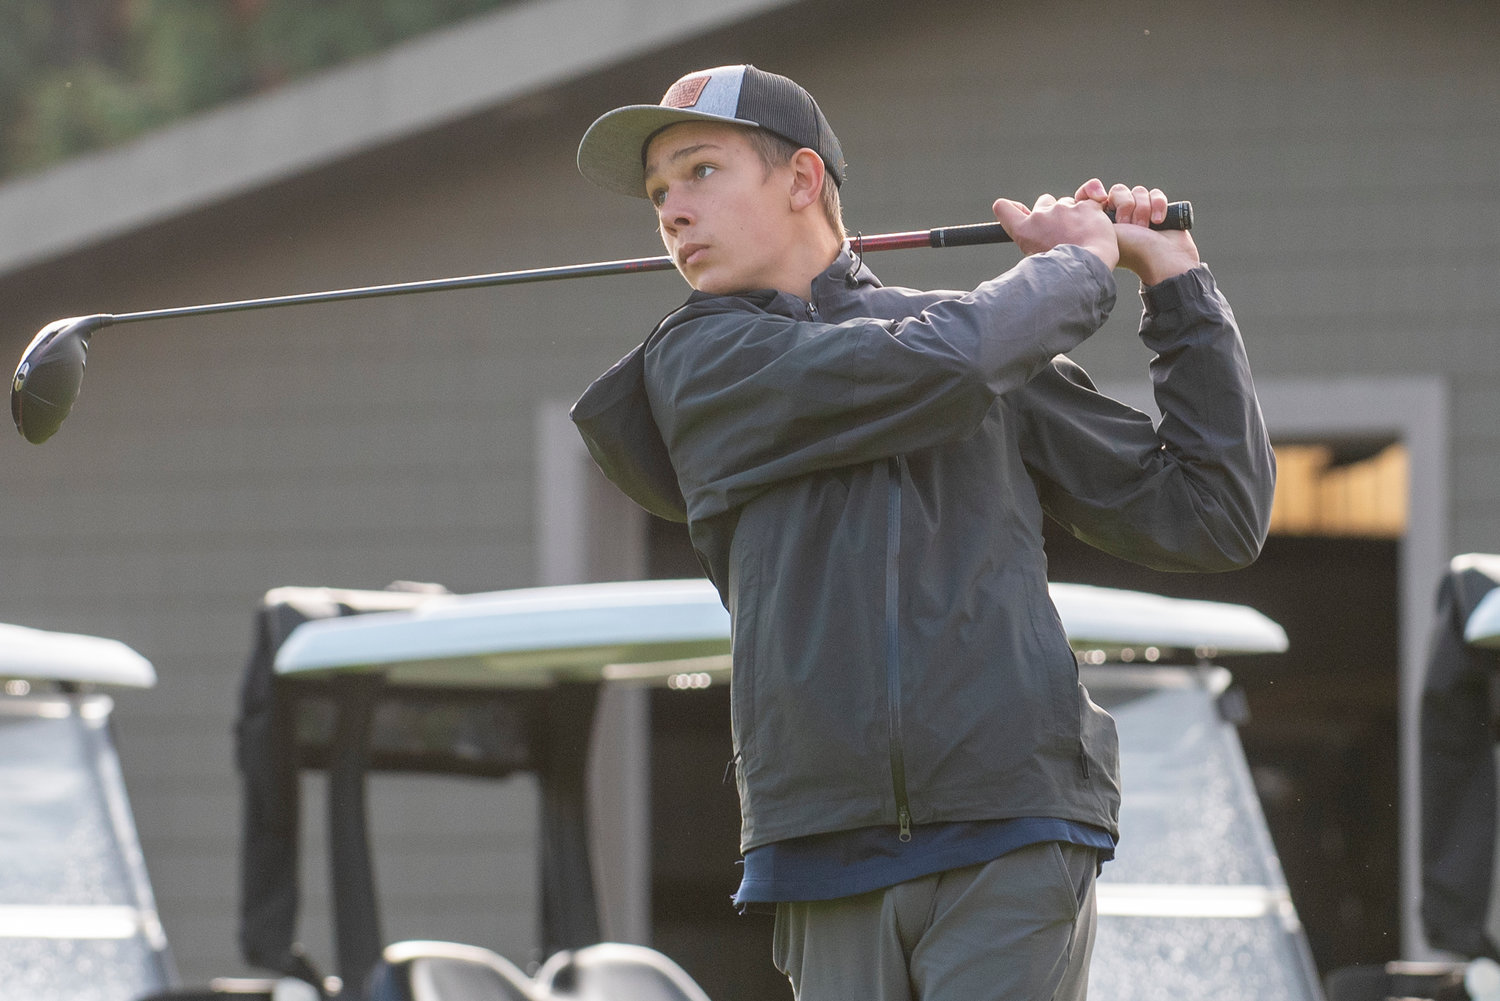 Black Hills junior Luke Fenner tees off on Day One of the 2A District 4 Boys Golf Tournament at Riverside Golf Course in Chehalis on Oct. 20, 2021.